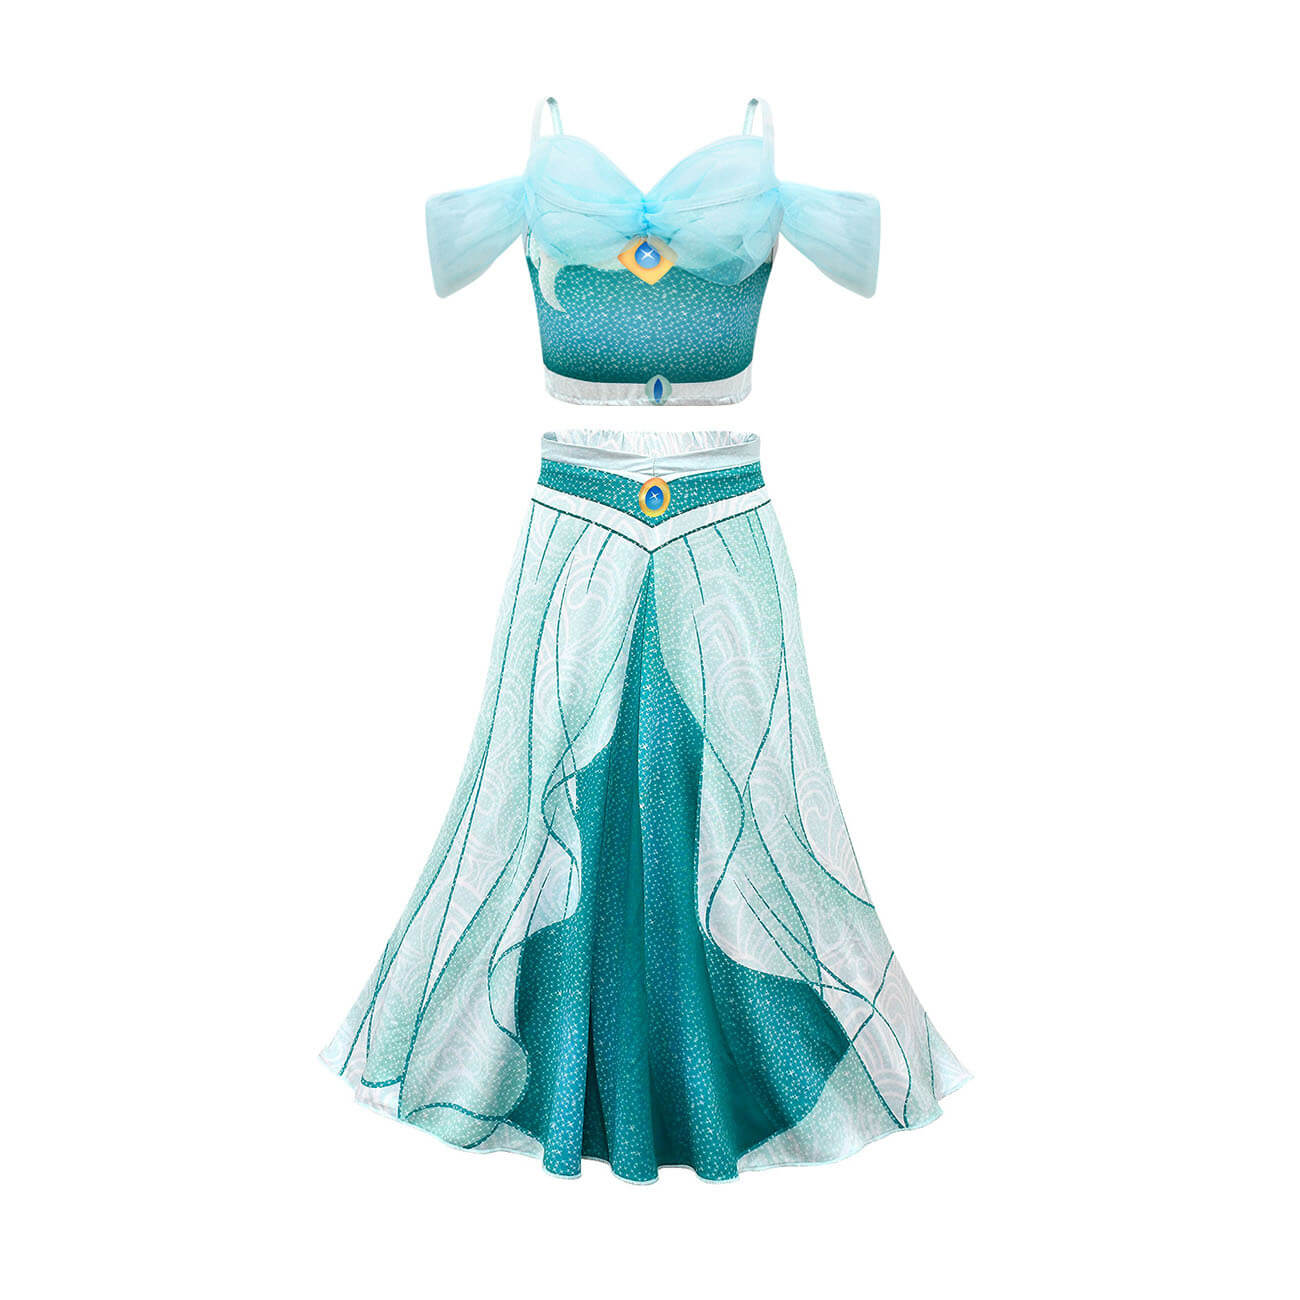 Princess Jasmine Dress Kids Dress up Costume Fancy Party Role Play Outfit